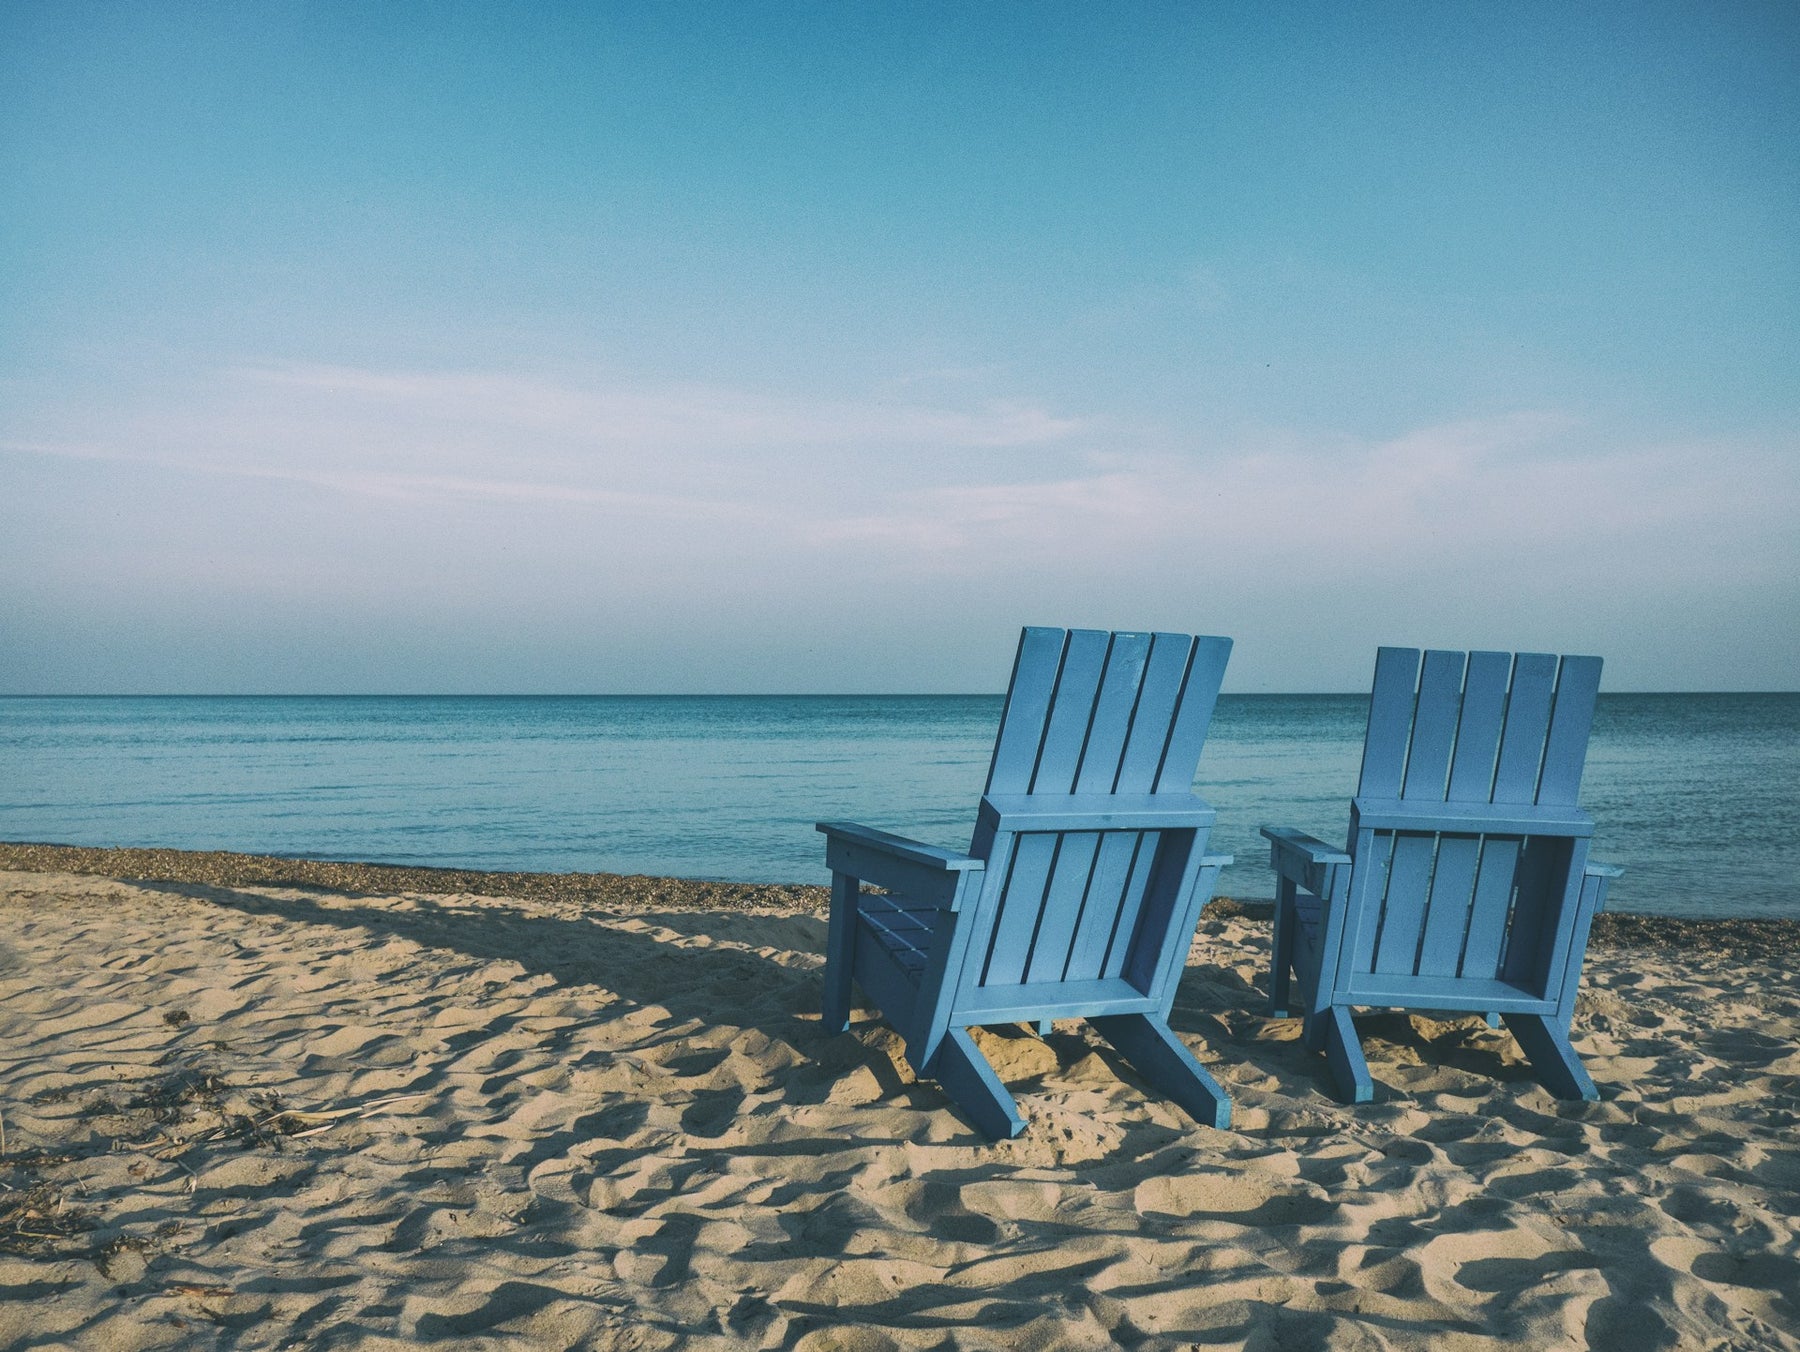 Blue adirondack chairs on a beach overlooking the ocean